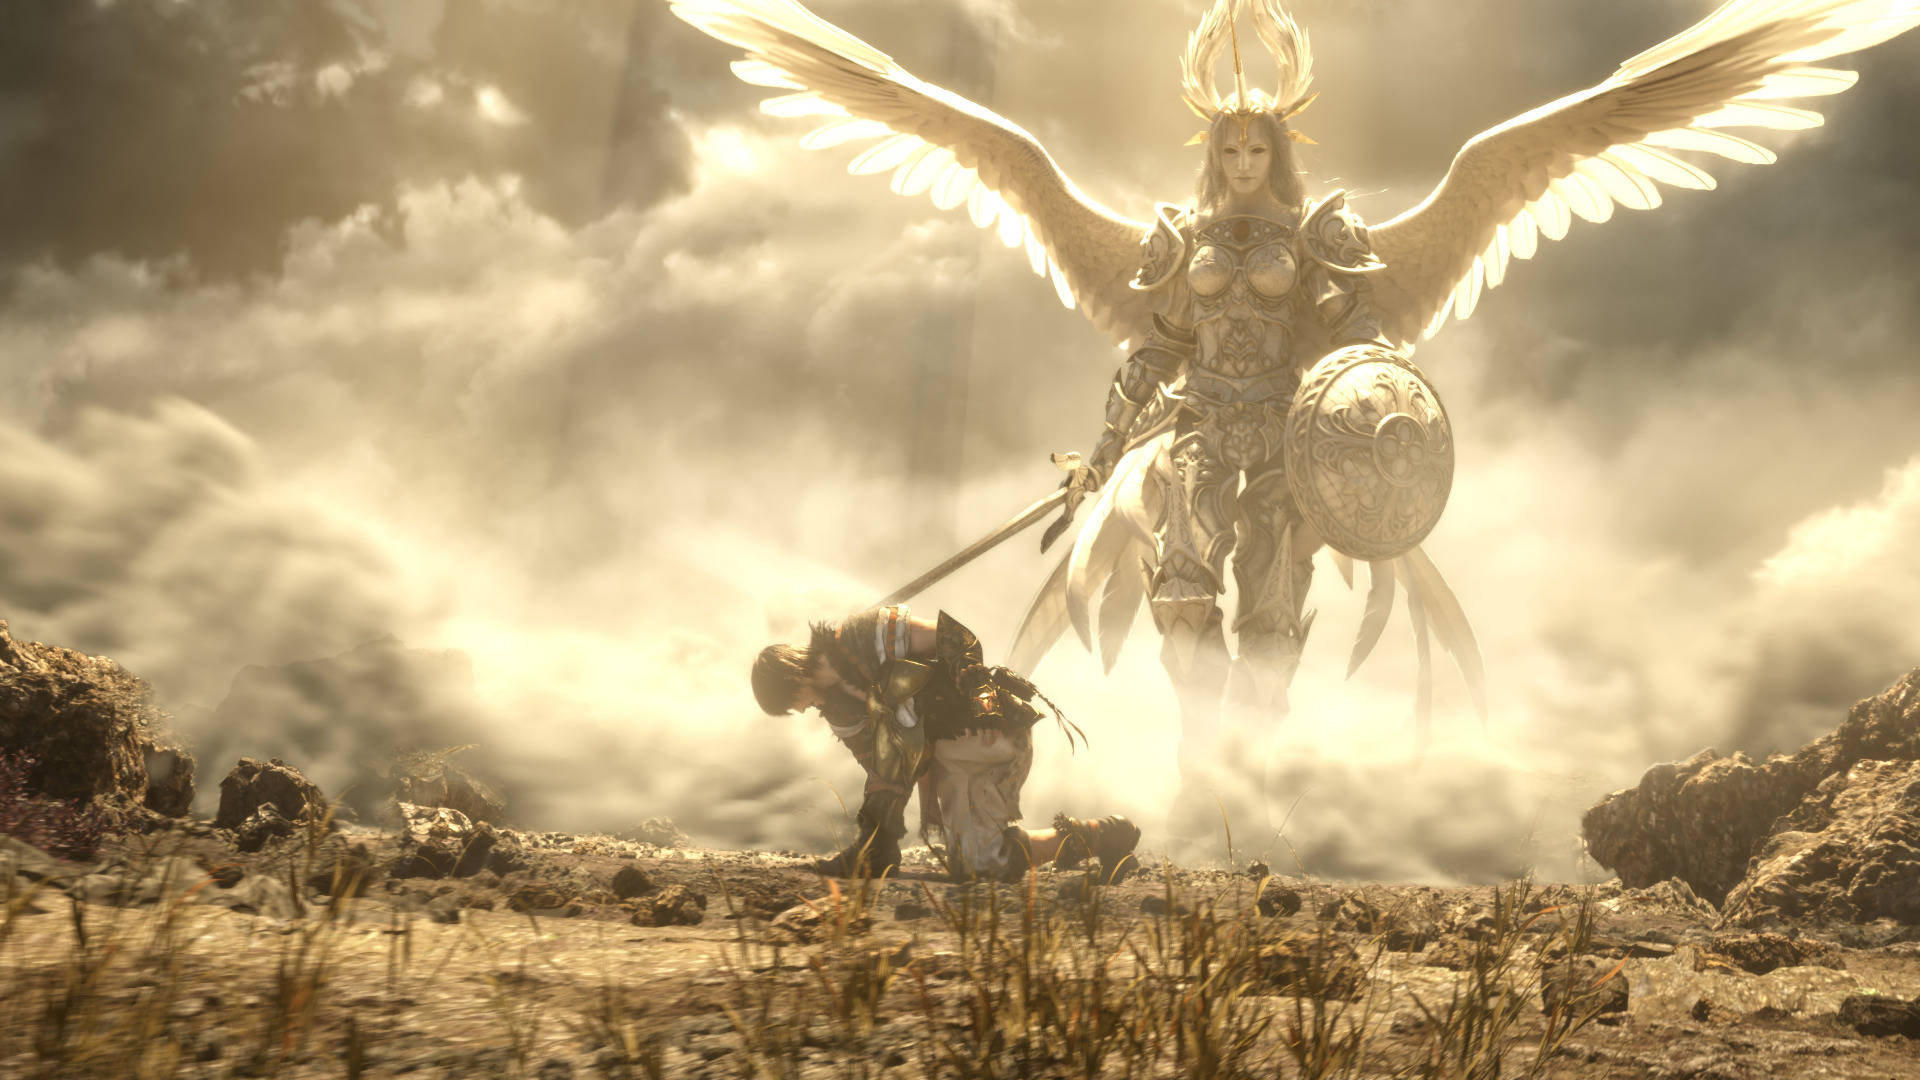 Discover a World of Adventure in Final Fantasy XIV Wallpaper